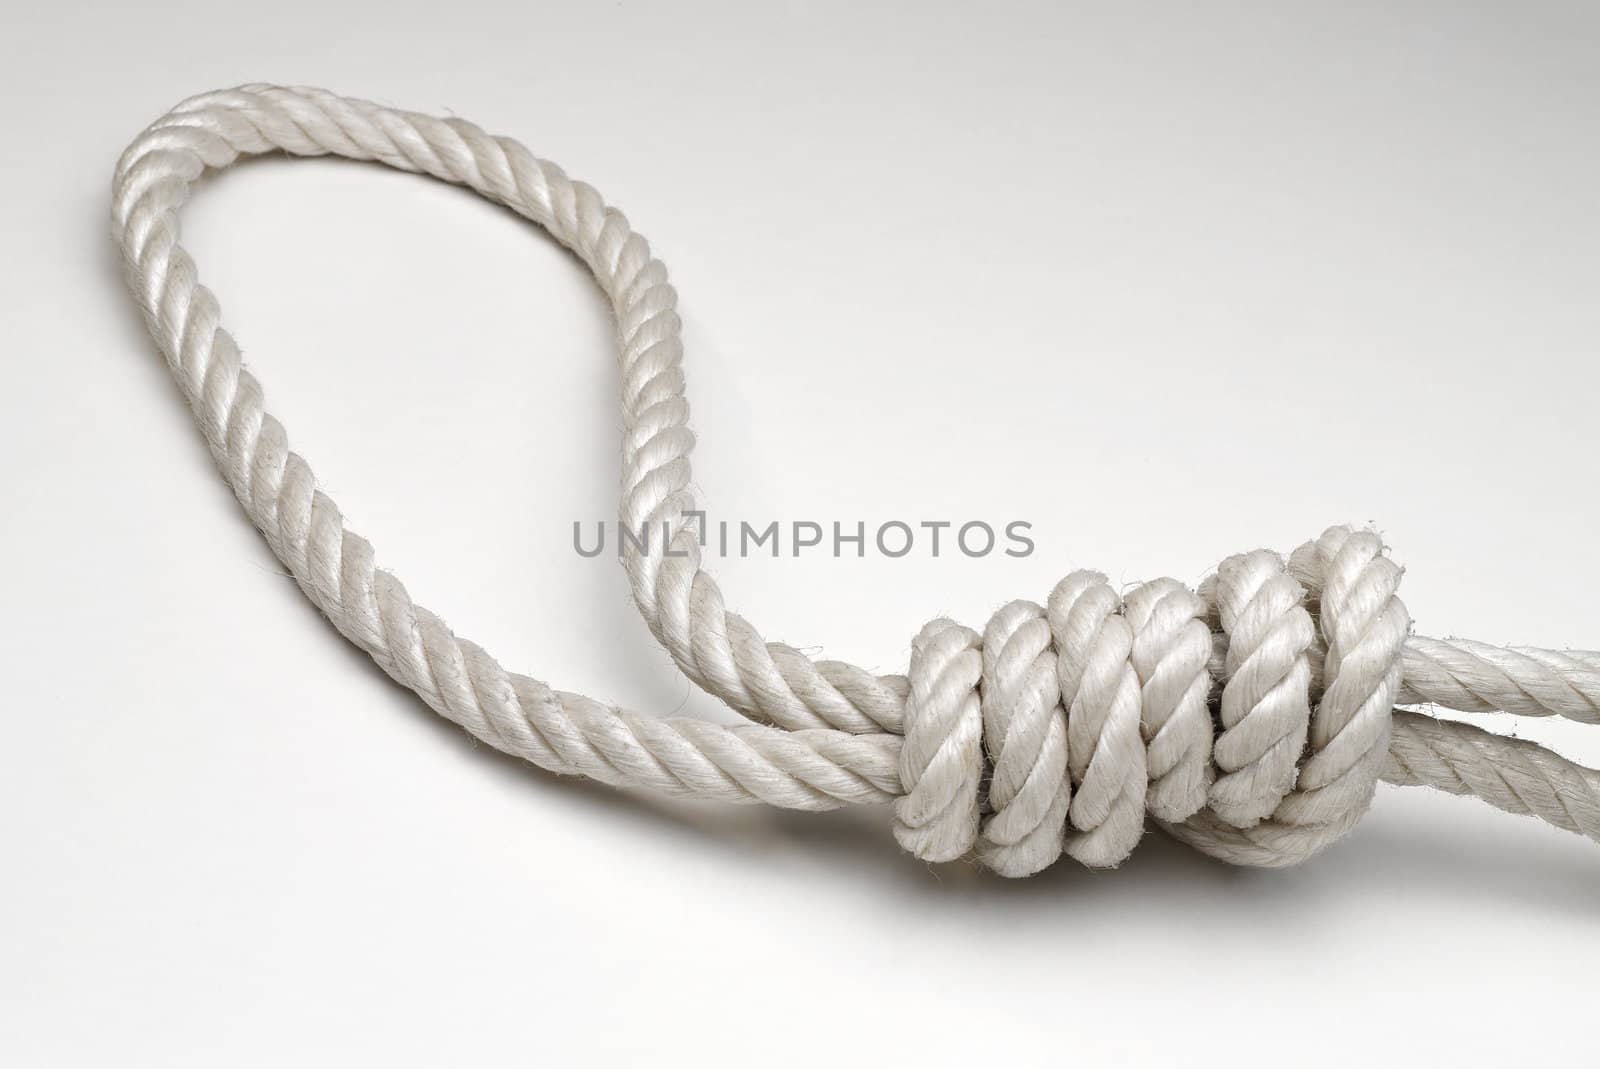 Rope with hangman's noose on white background